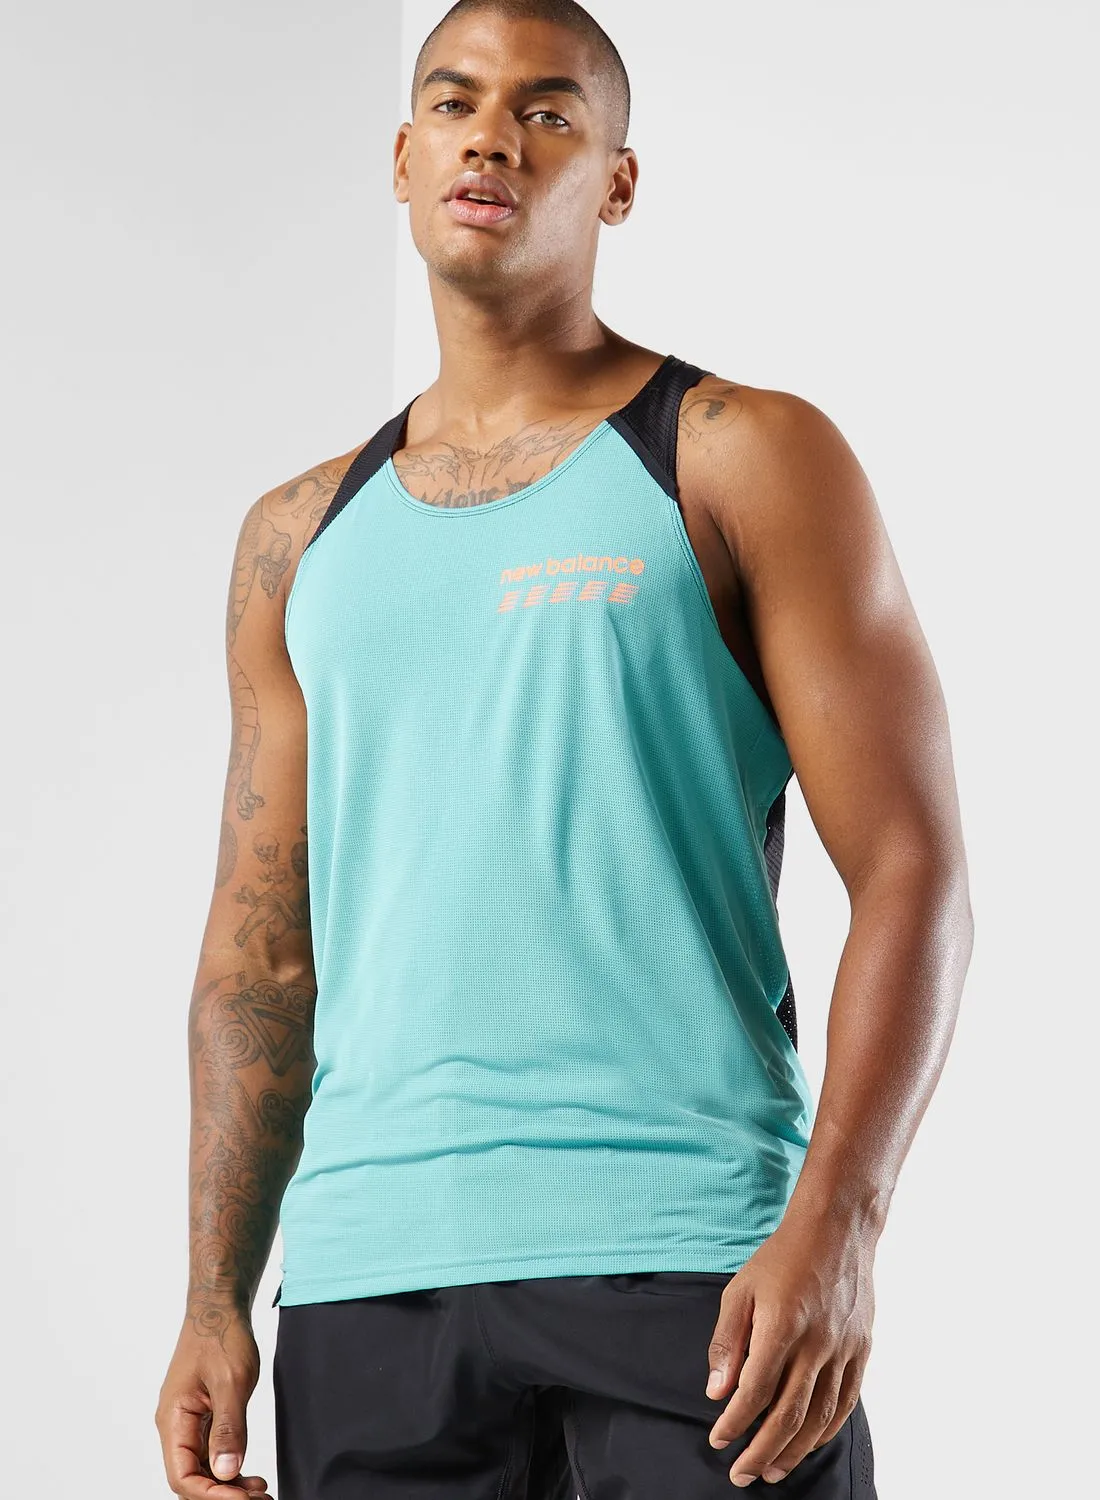 New Balance Accelerate Pacer Printed Tank